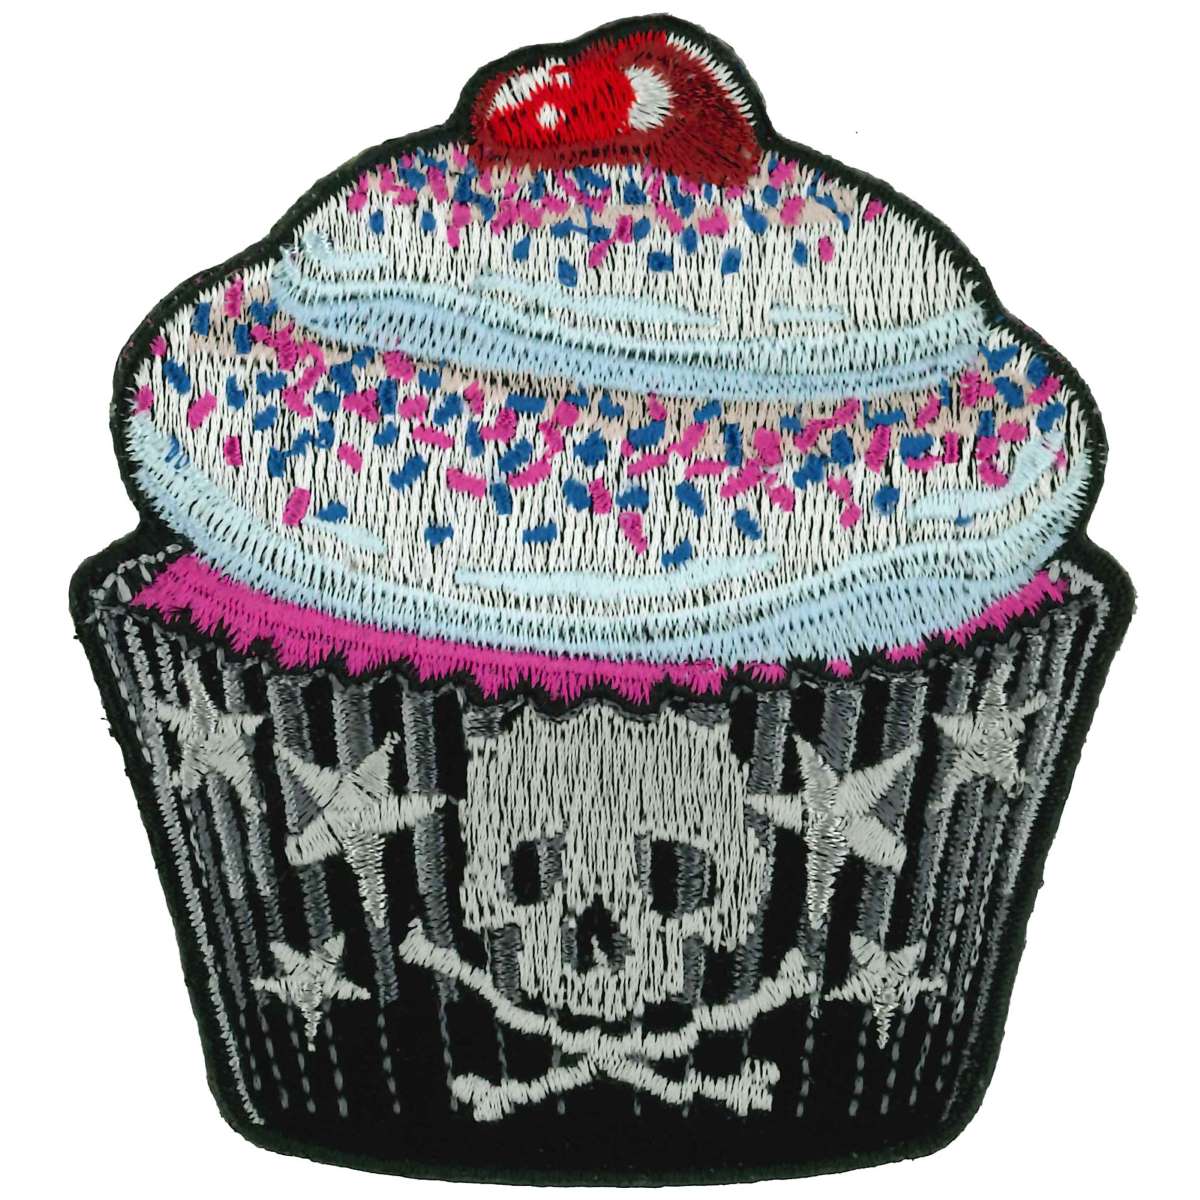 Hot Leathers Cupcake Skull 3.25" Patch PPQ1533